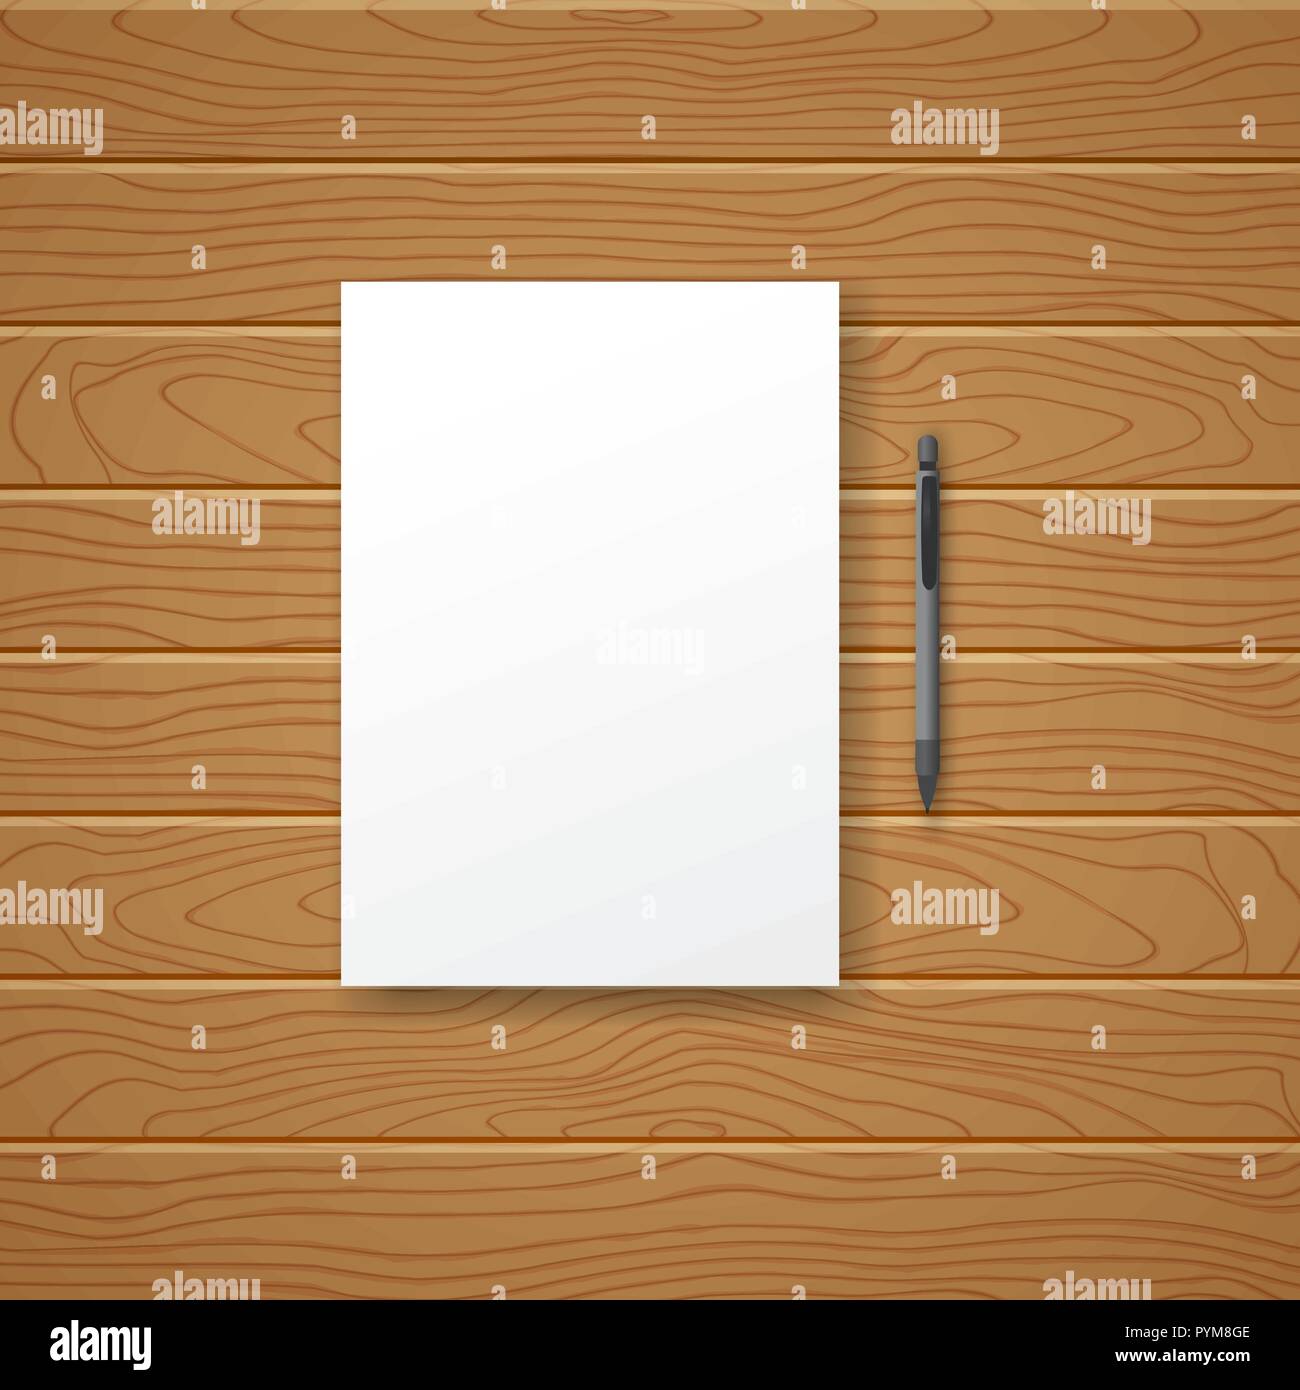 White empty sheet of paper and pen against in the form of a wooden table. Vector illustration of a template, flyer, poster, model. Stock Vector